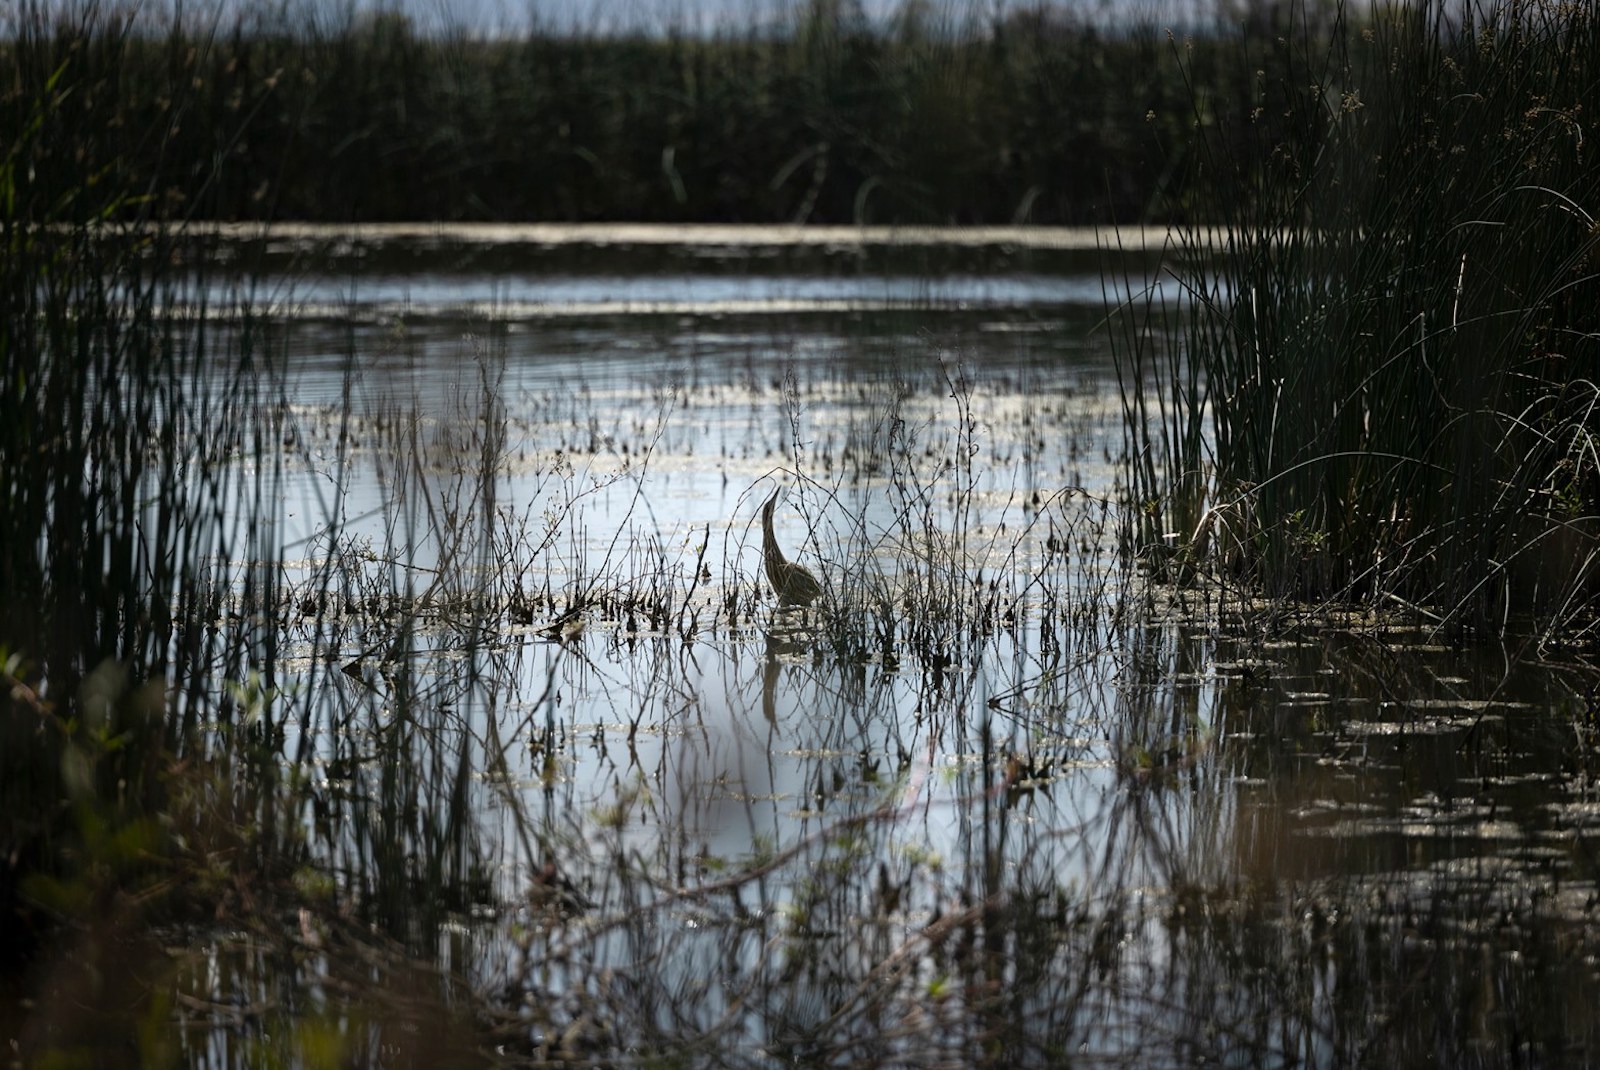 An American bittern feeds at the Colusa National Wildlife Refuge on April 28, 2022.